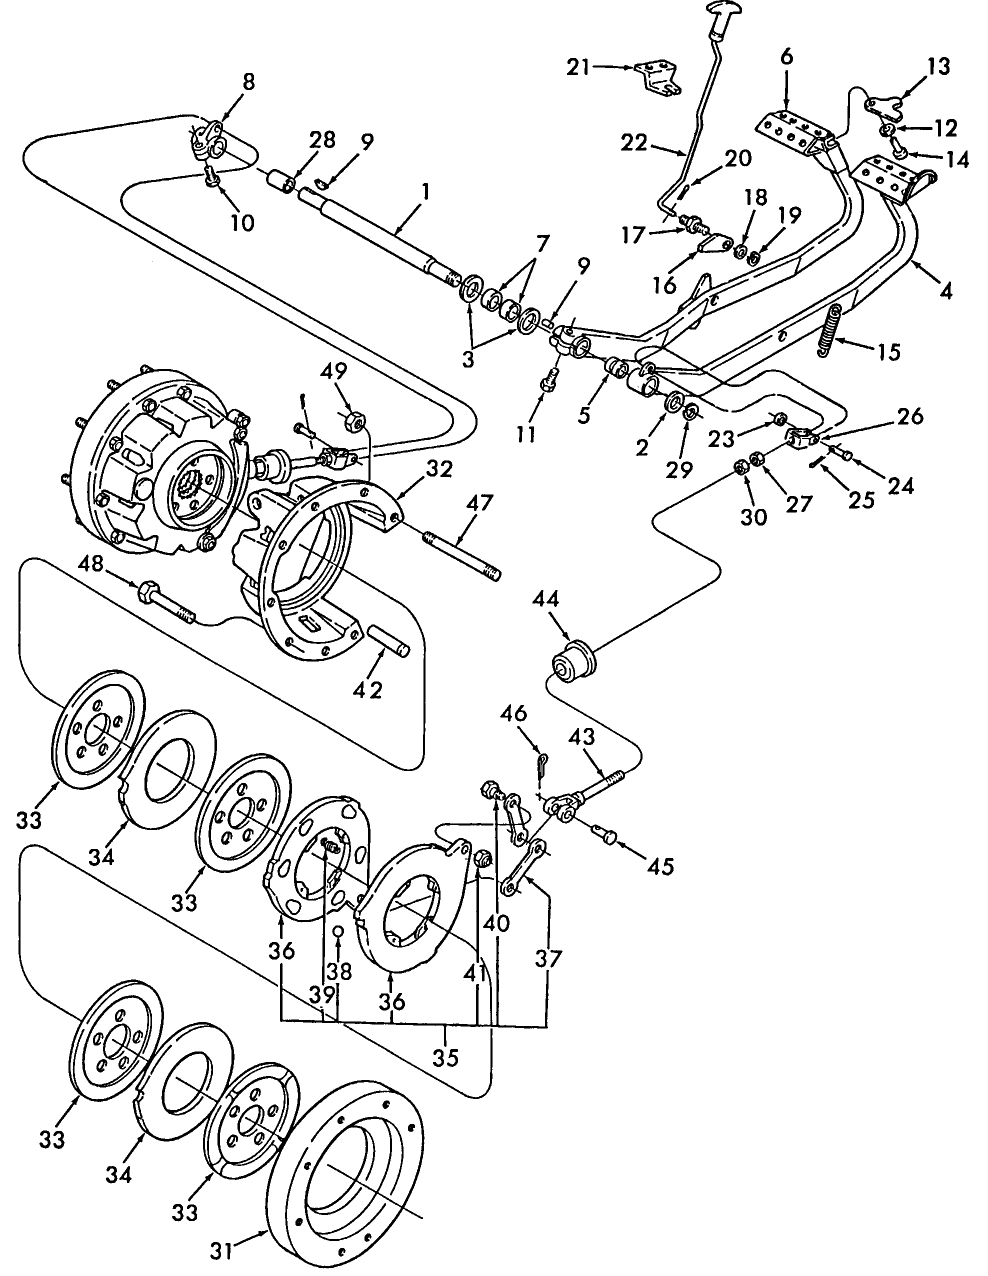 02A01 BRAKES, MECHANICAL CONTROLS & RELATED PARTS